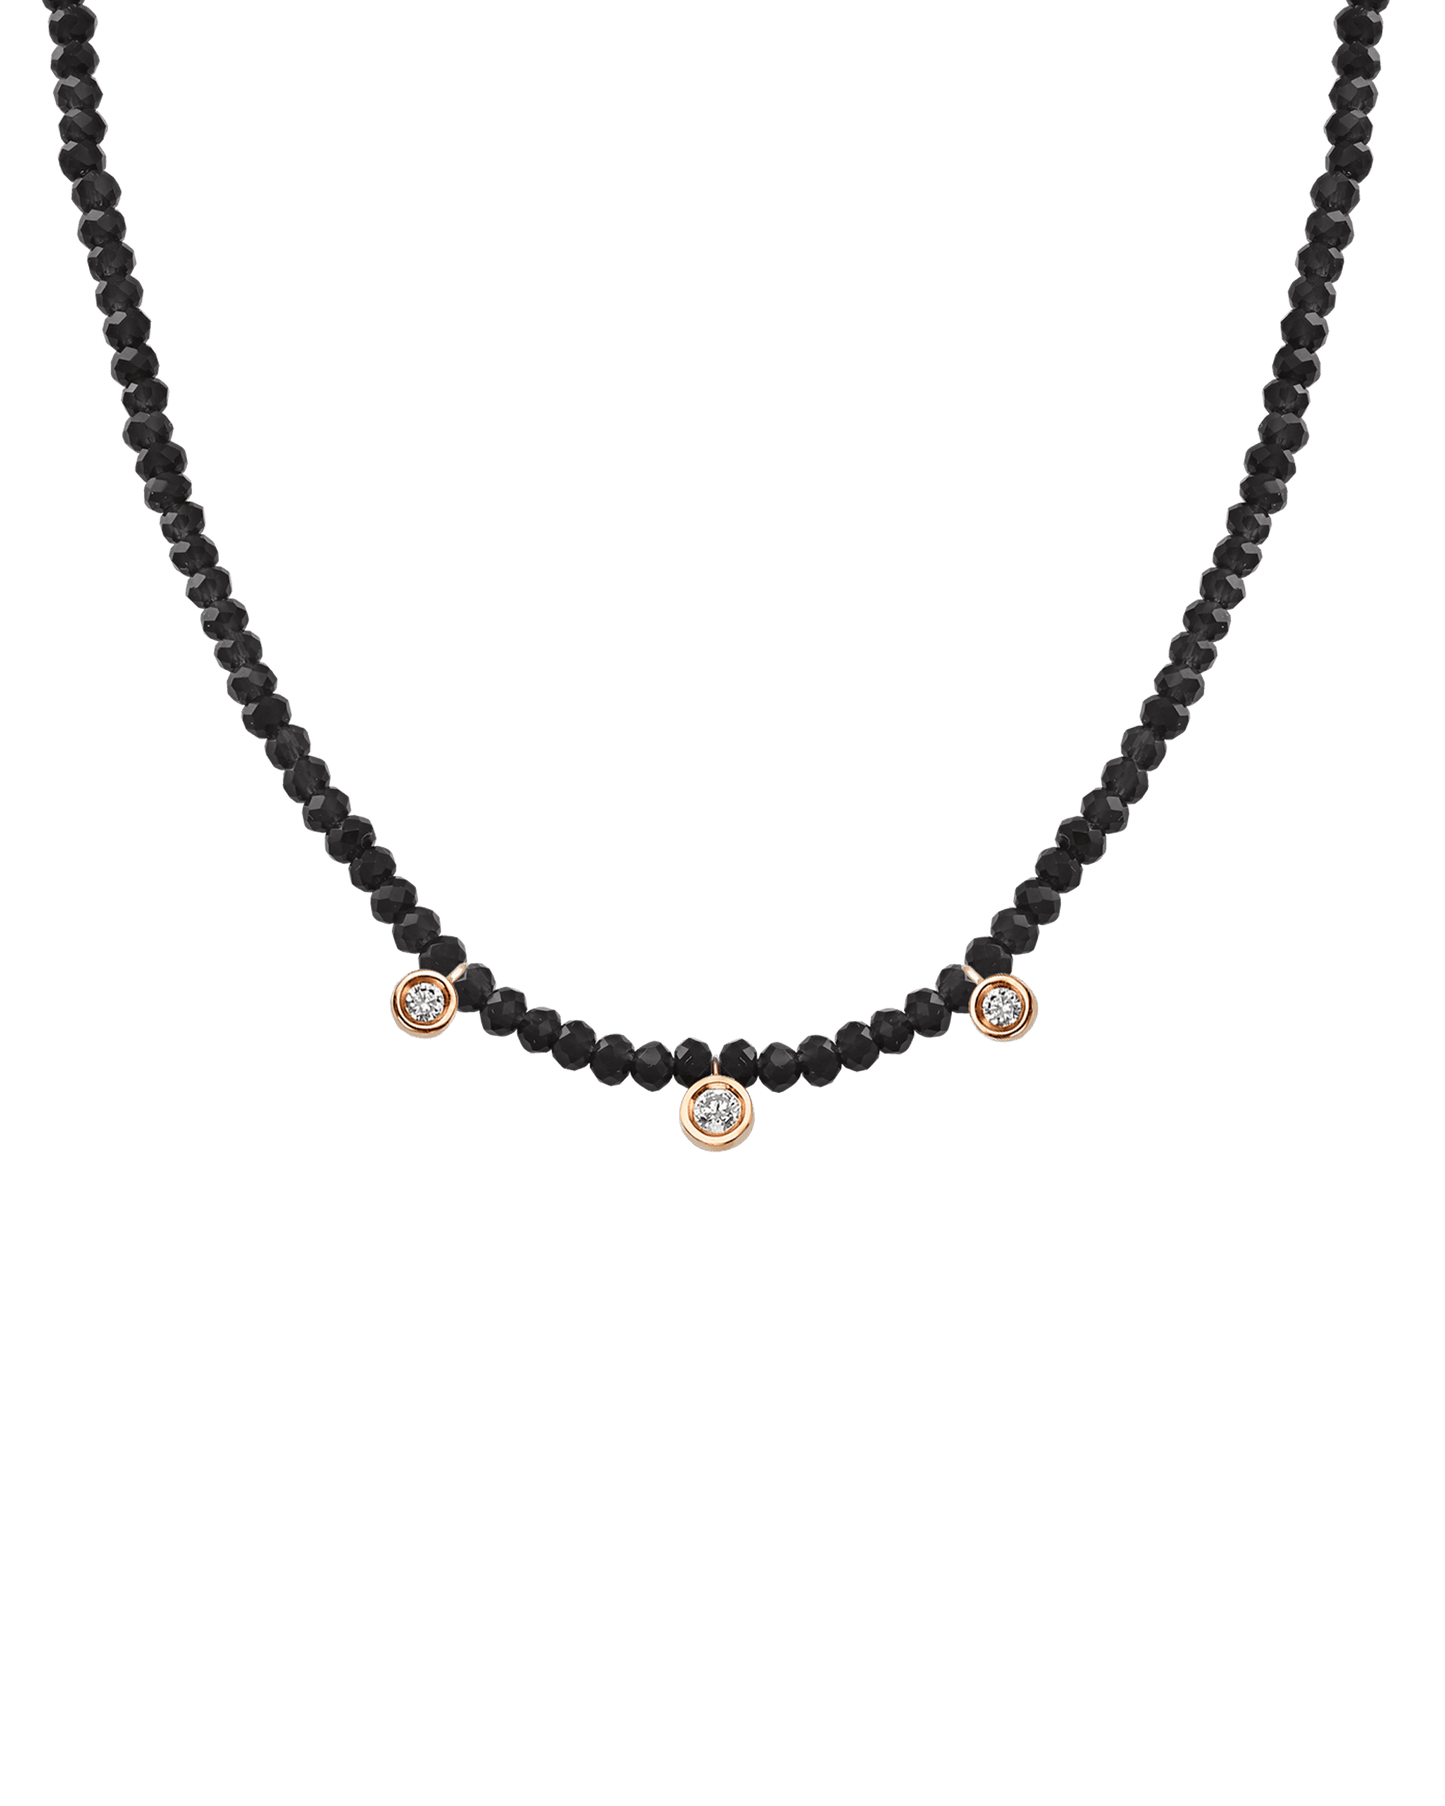 Turquoise Gemstone & Three diamonds Necklace - 14K Rose Gold Necklaces magal-dev Glass Beads Black Spinnel 14" - Collar 